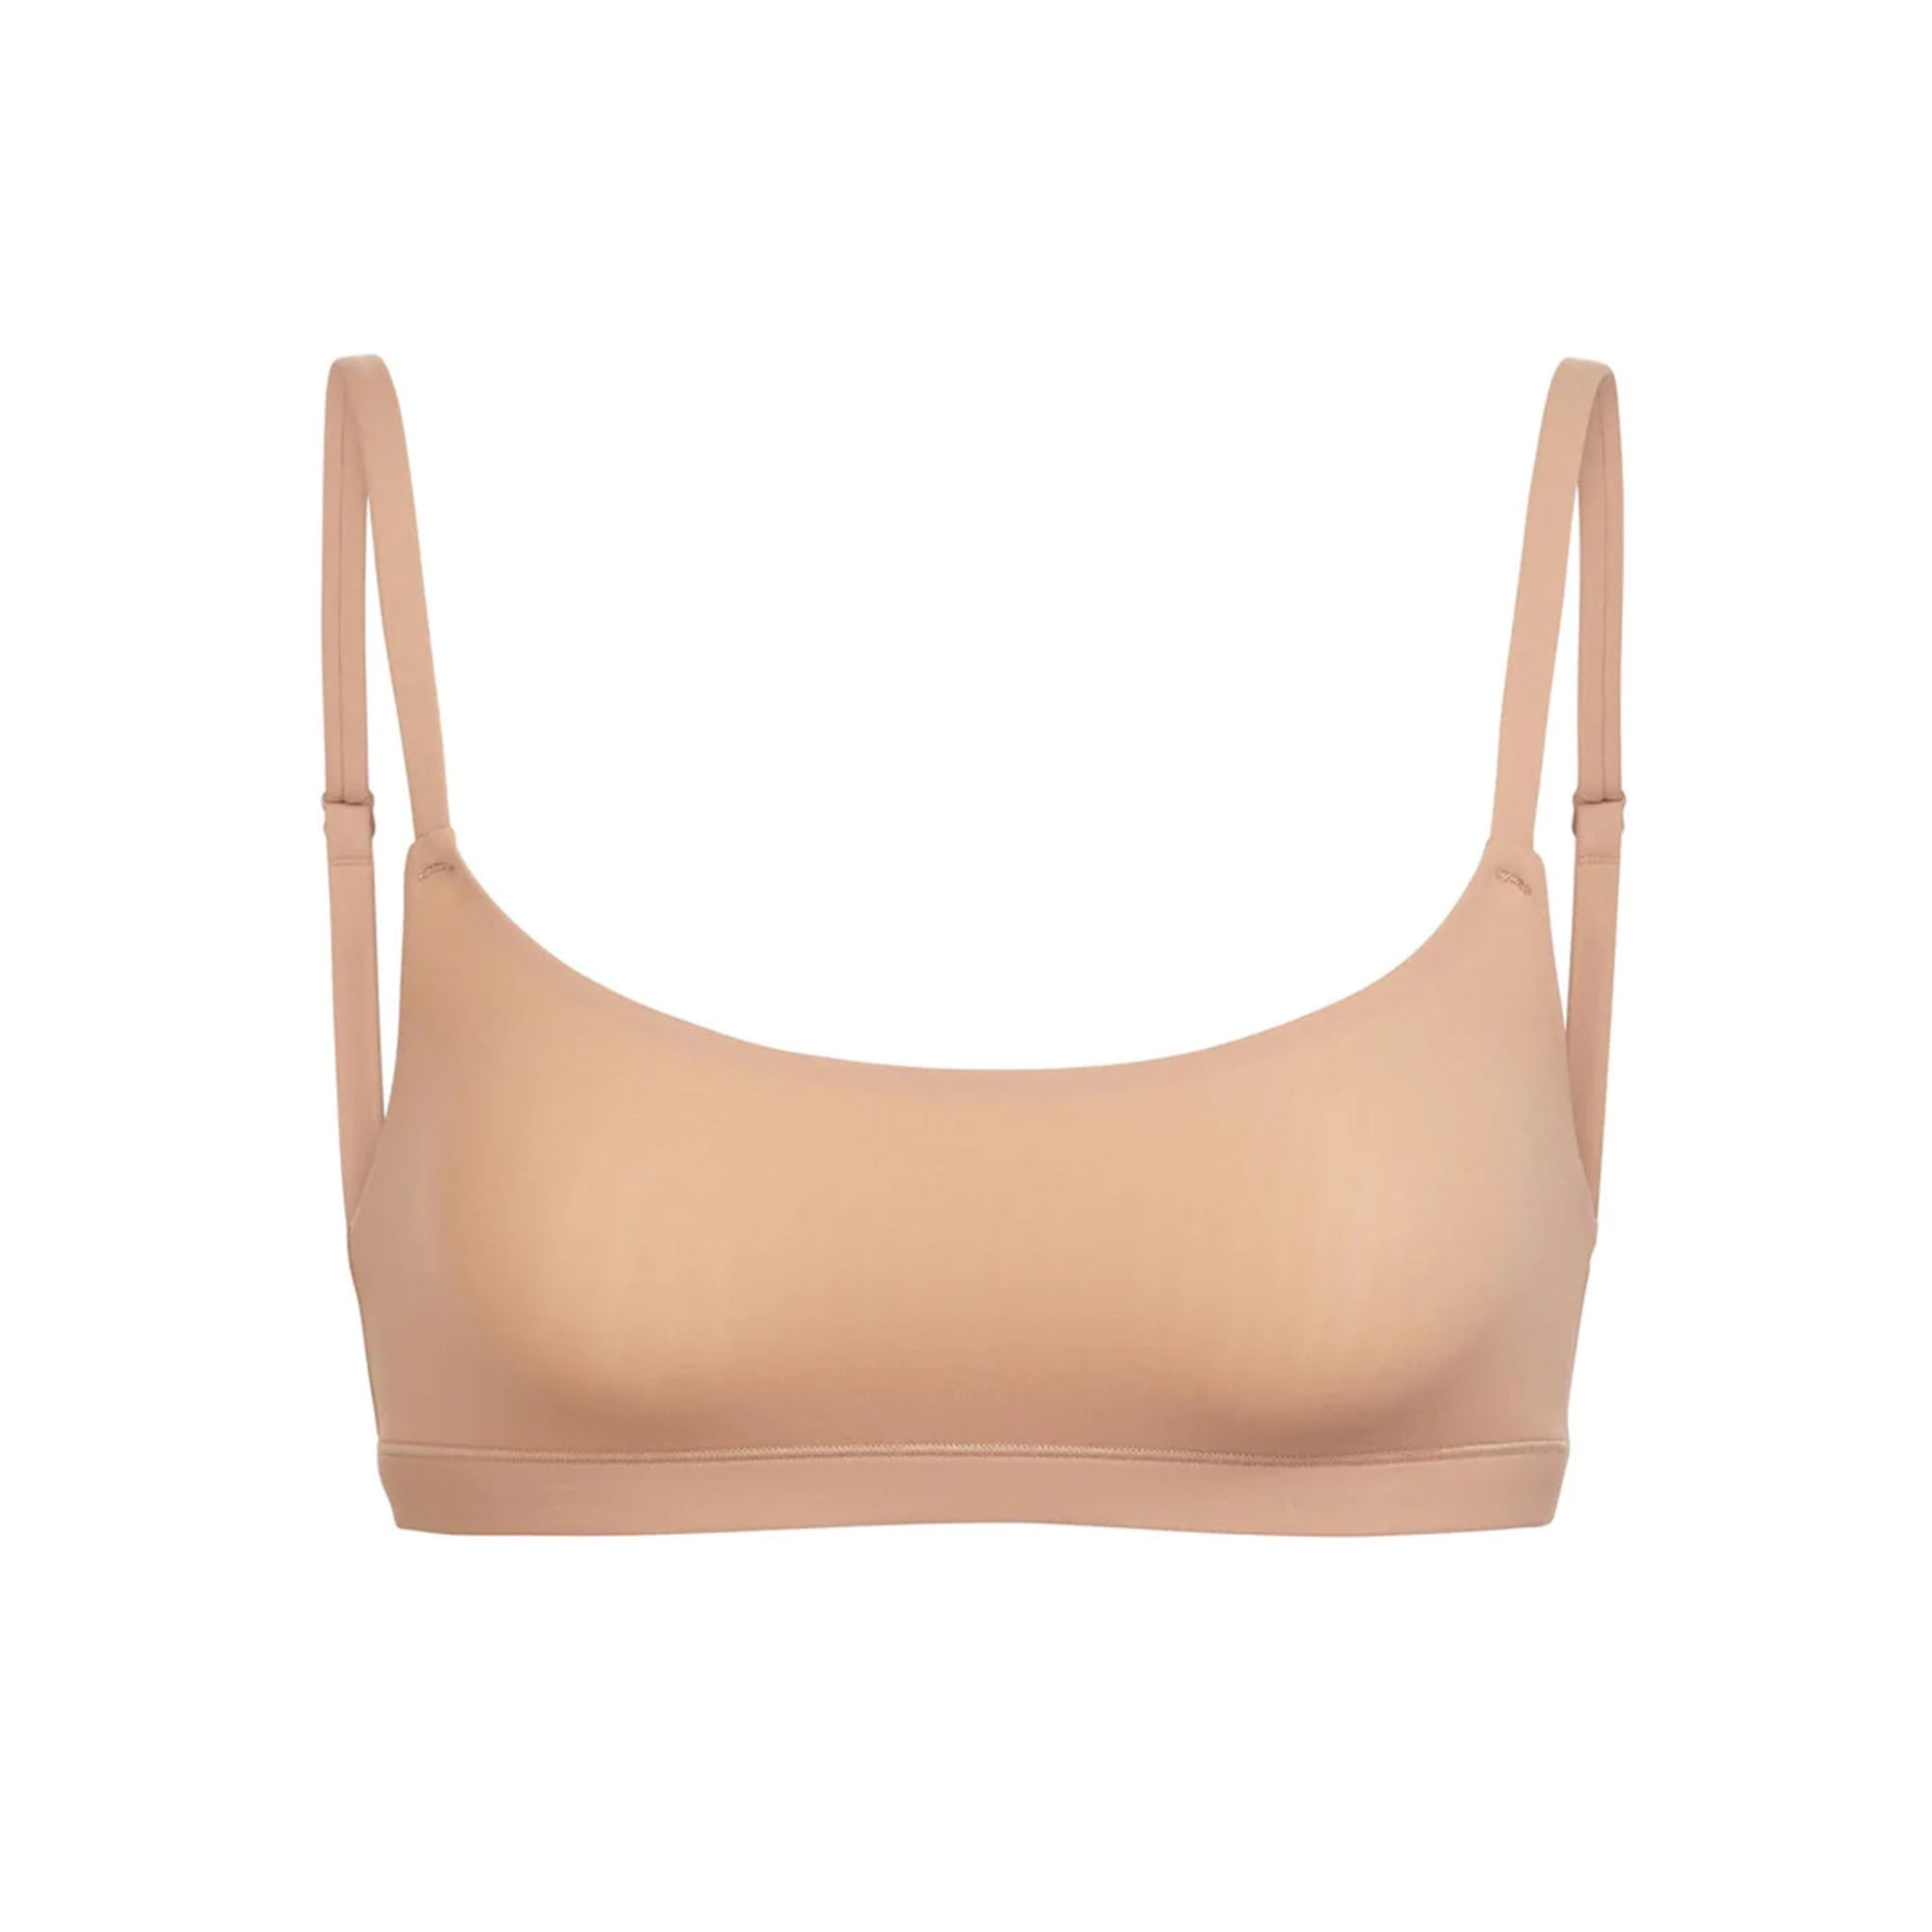 I'm a 32C and bought a Skims bra - it gives really good cleavage